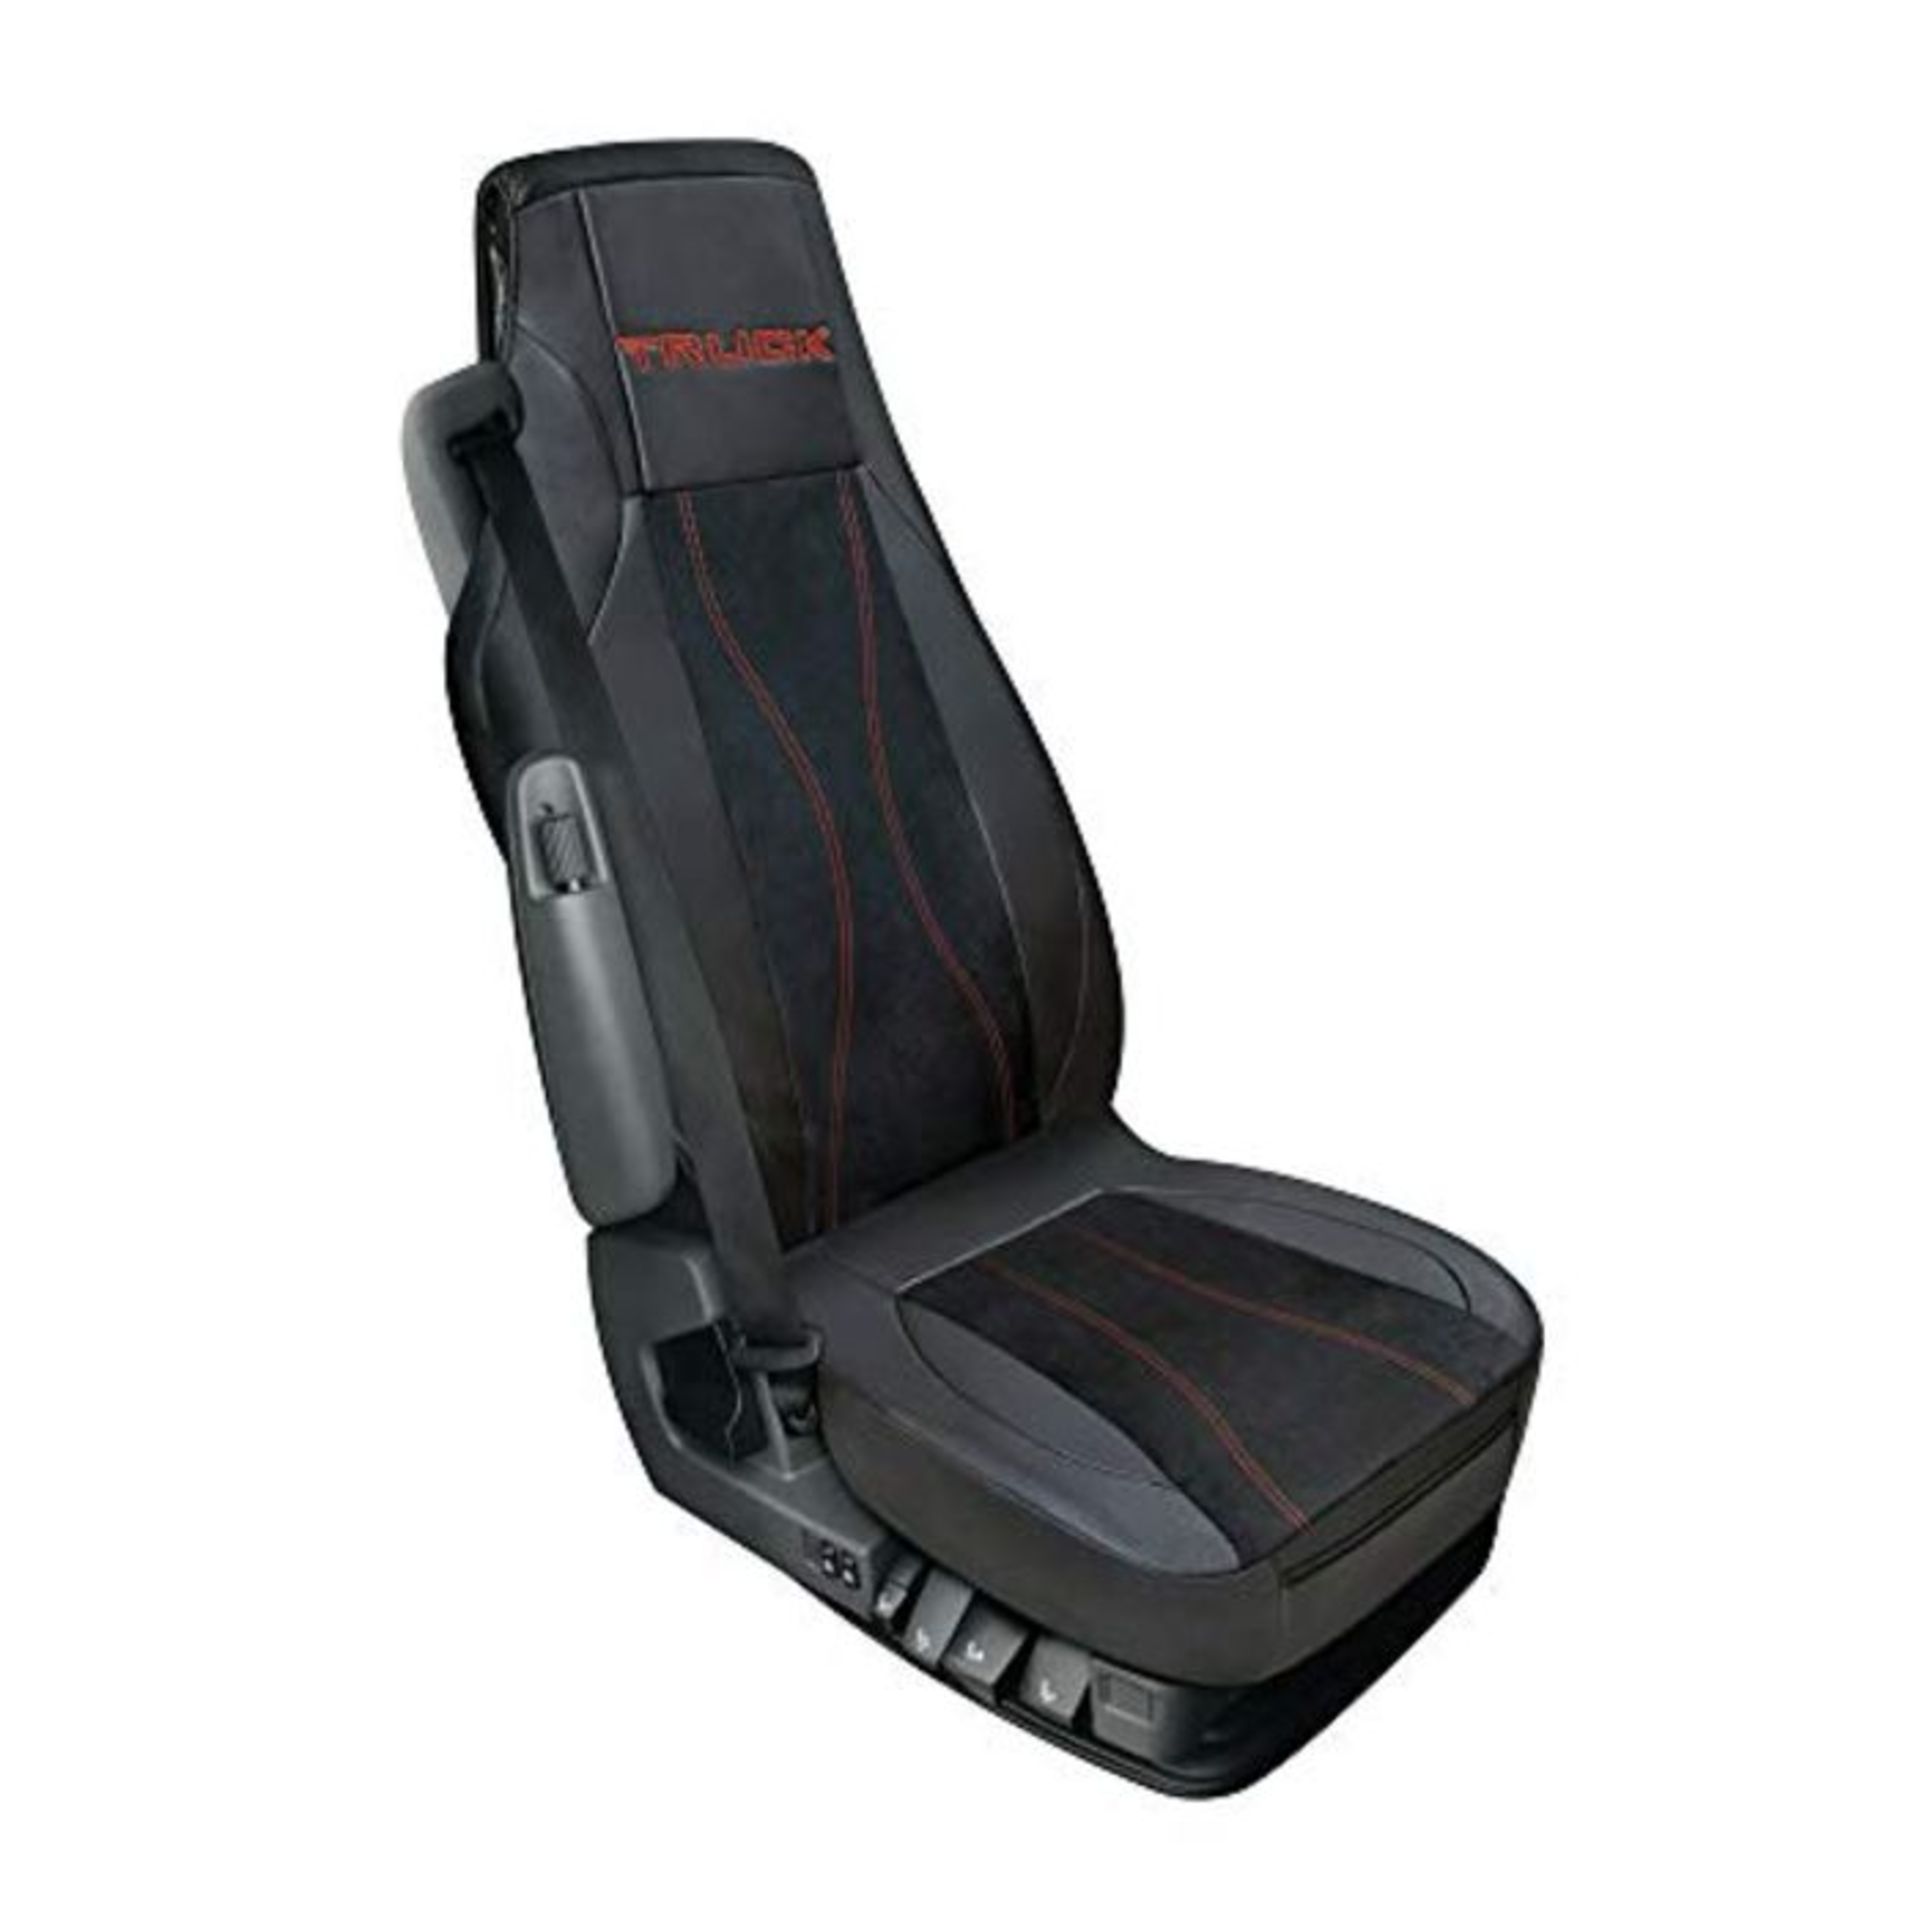 Lampa Luana Truck Seat covering made from Imitation Leather Black/Red